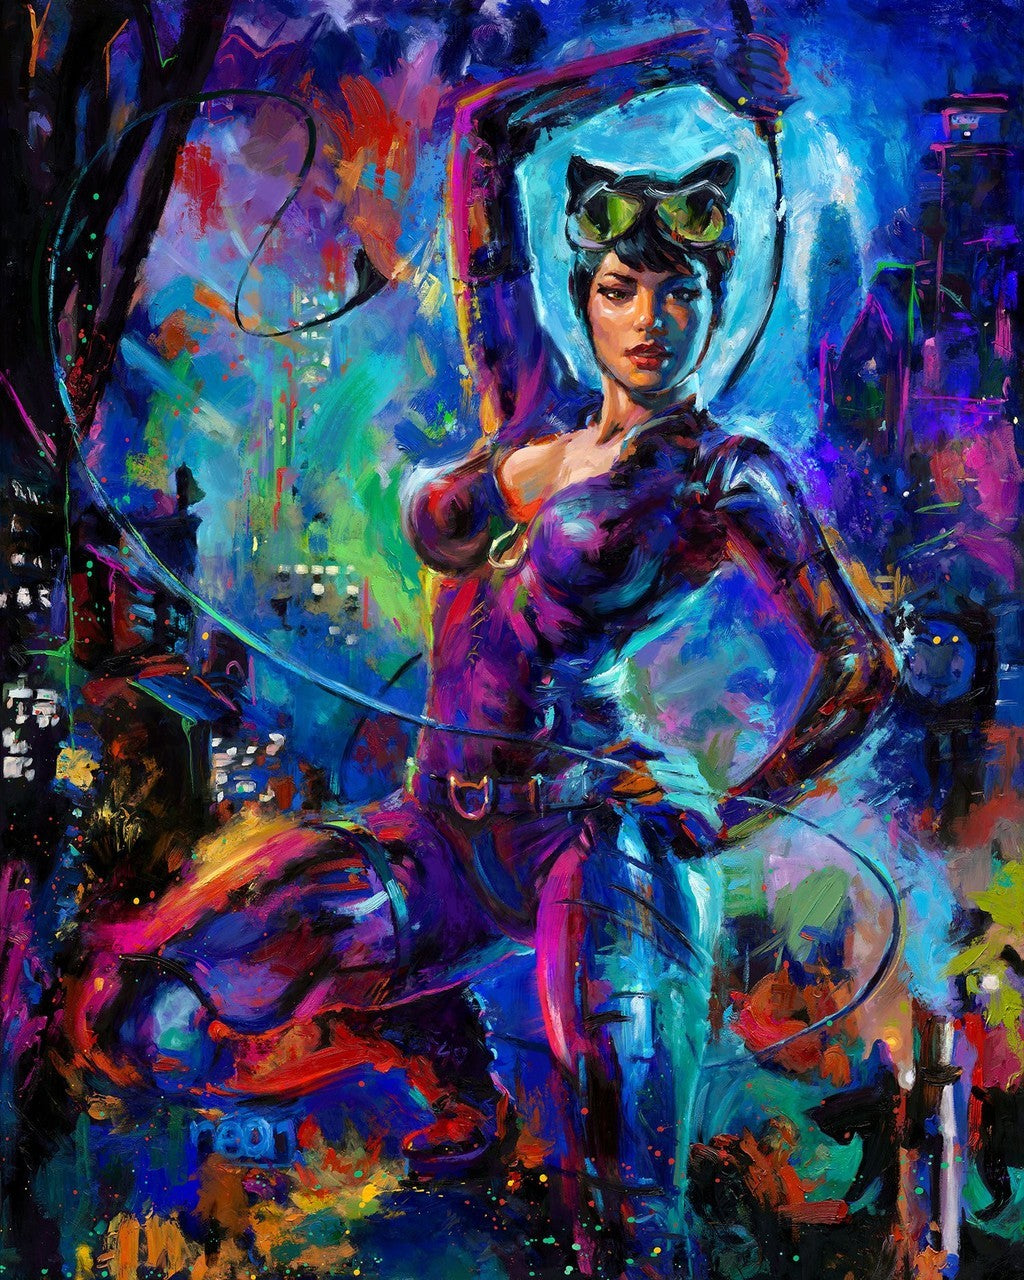 Catwoman standing in the twilight of Gotham, whip in hand and ready to prowl the city.